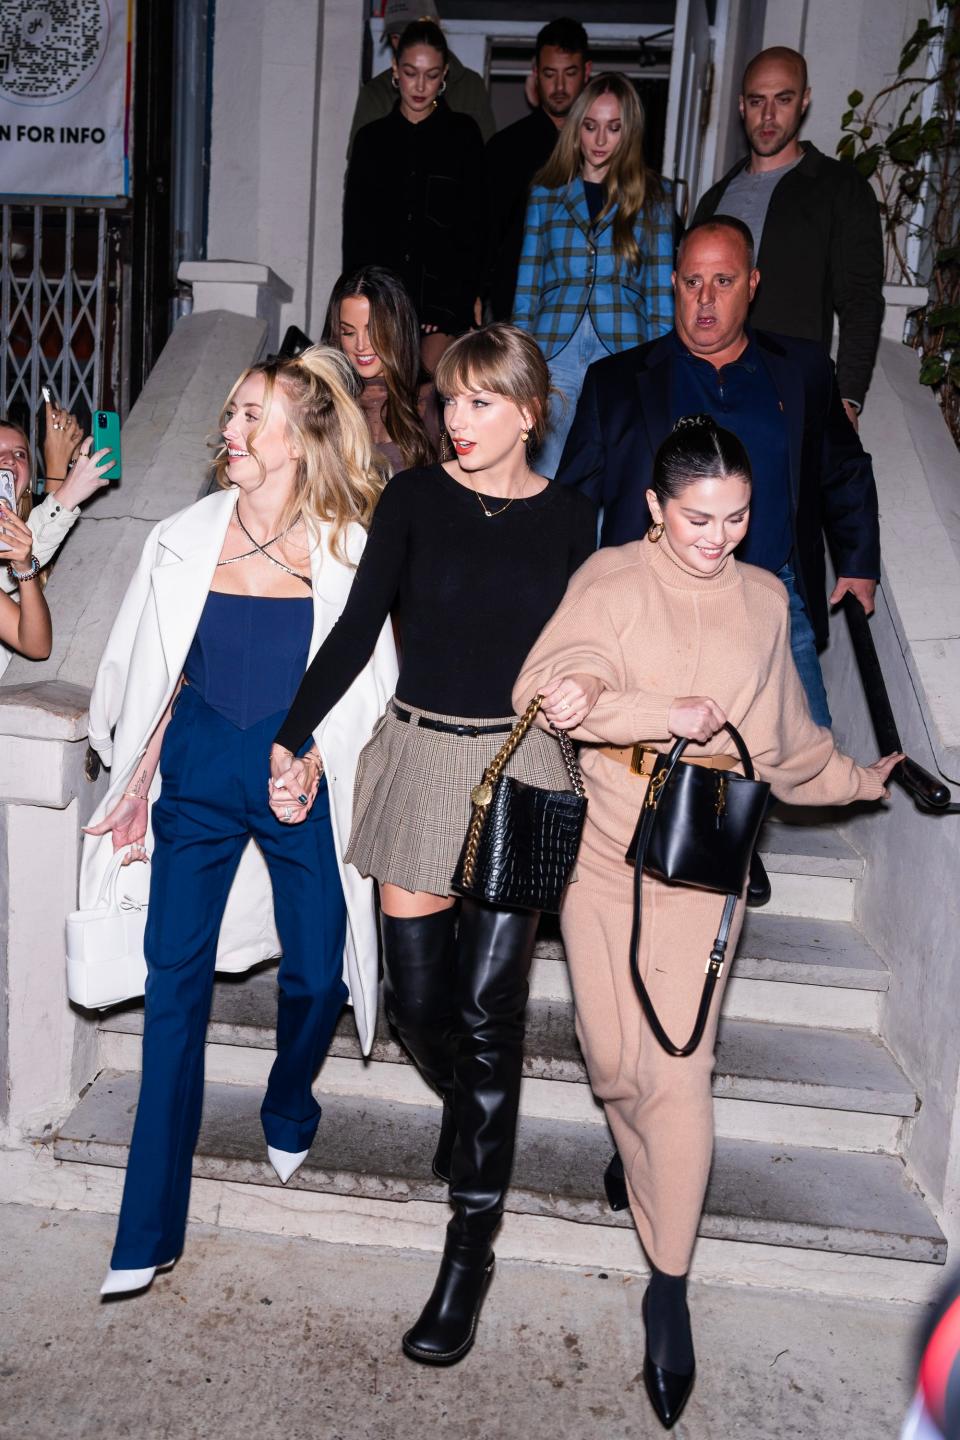 Taylor Swift, center, was spotted hanging out in New York City on Saturday with friends Selena Gomez, right, Brittany Mahomes, left, Sophie Turner, back center, and Gigi Hadid, back left.